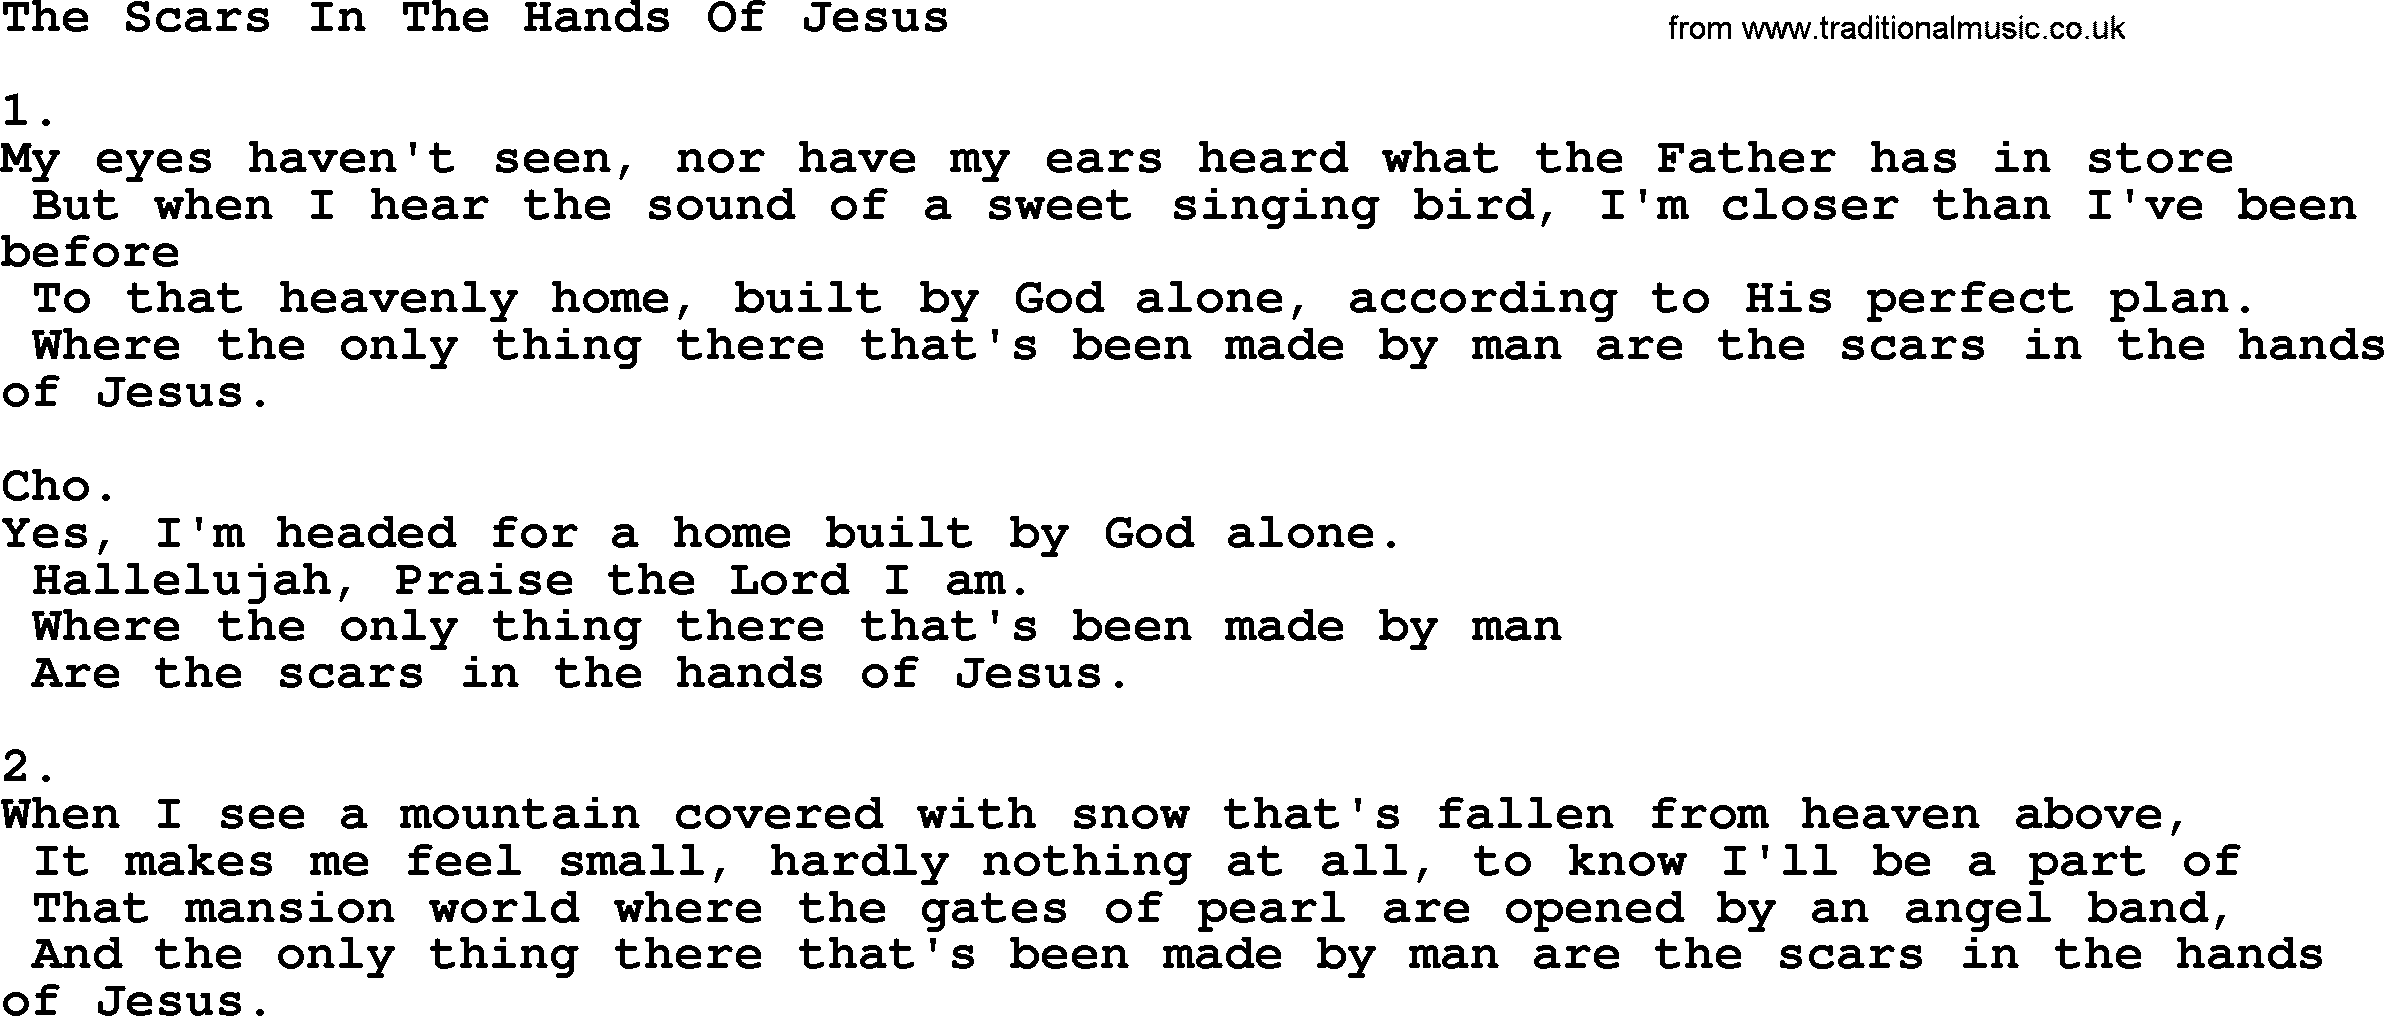 Apostolic & Pentecostal Hymns and Songs, Hymn: The Scars In The Hands Of Jesus lyrics and PDF